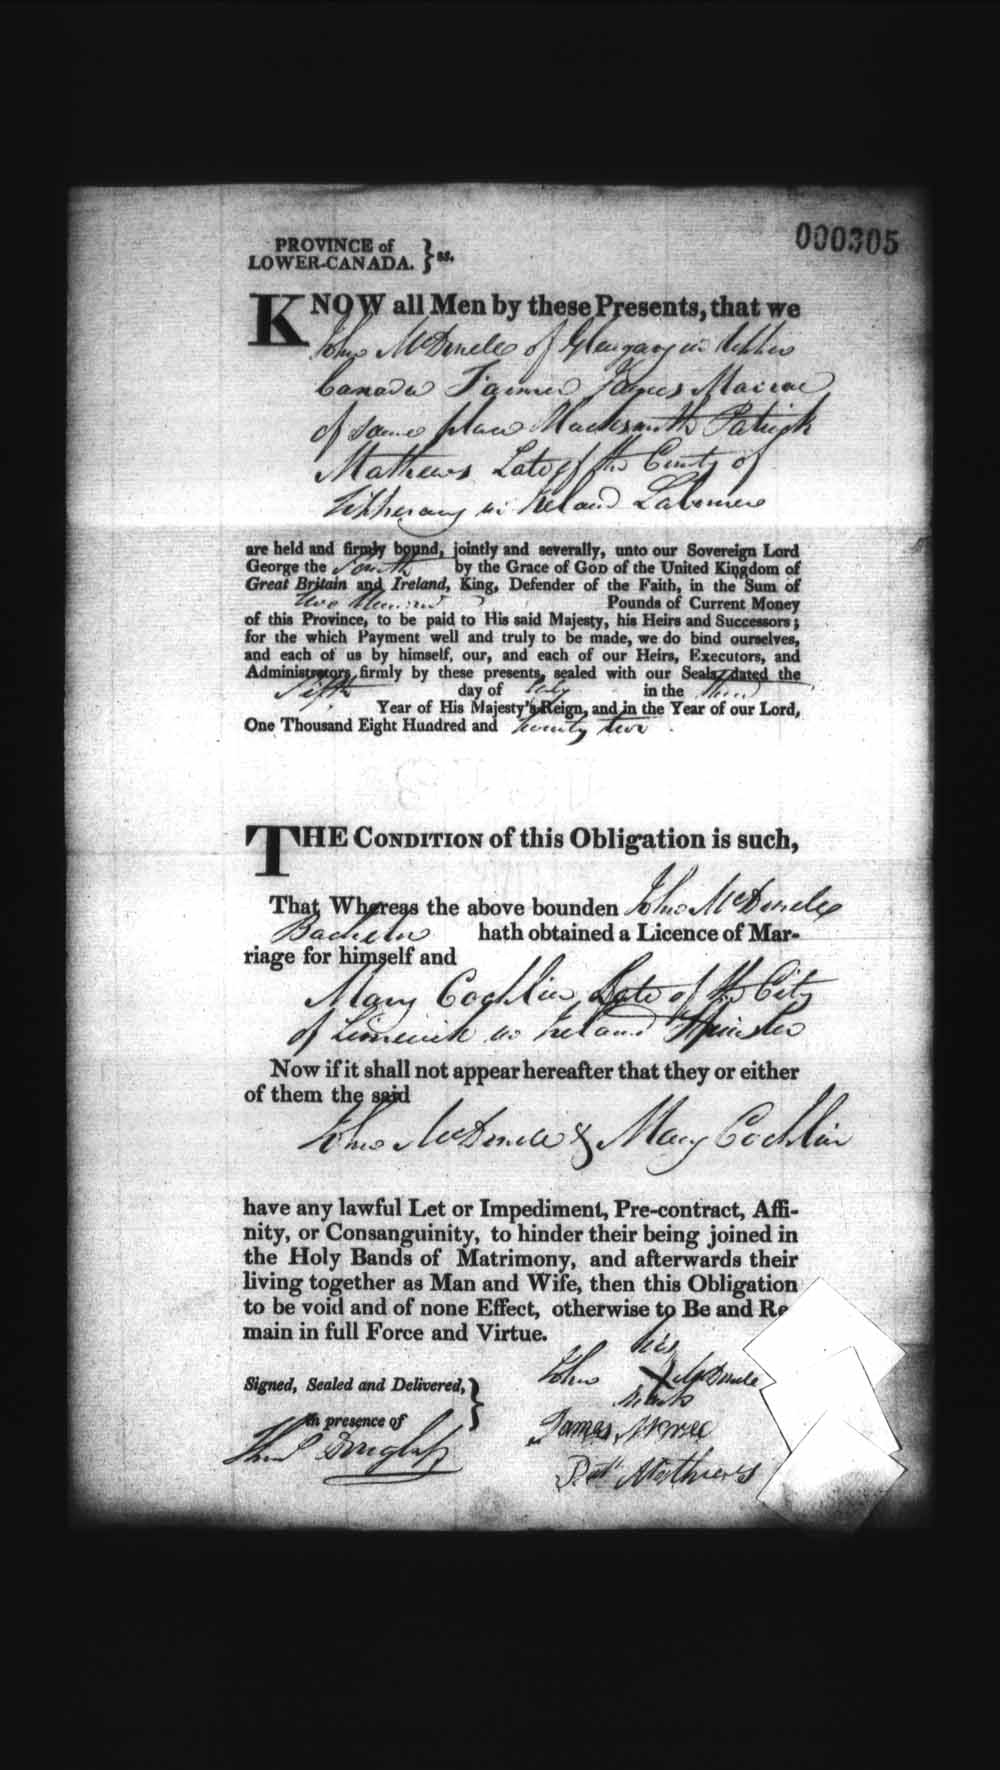 Digitized page of Upper and Lower Canada Marriage Bonds (1779-1865) for Image No.: e008236180